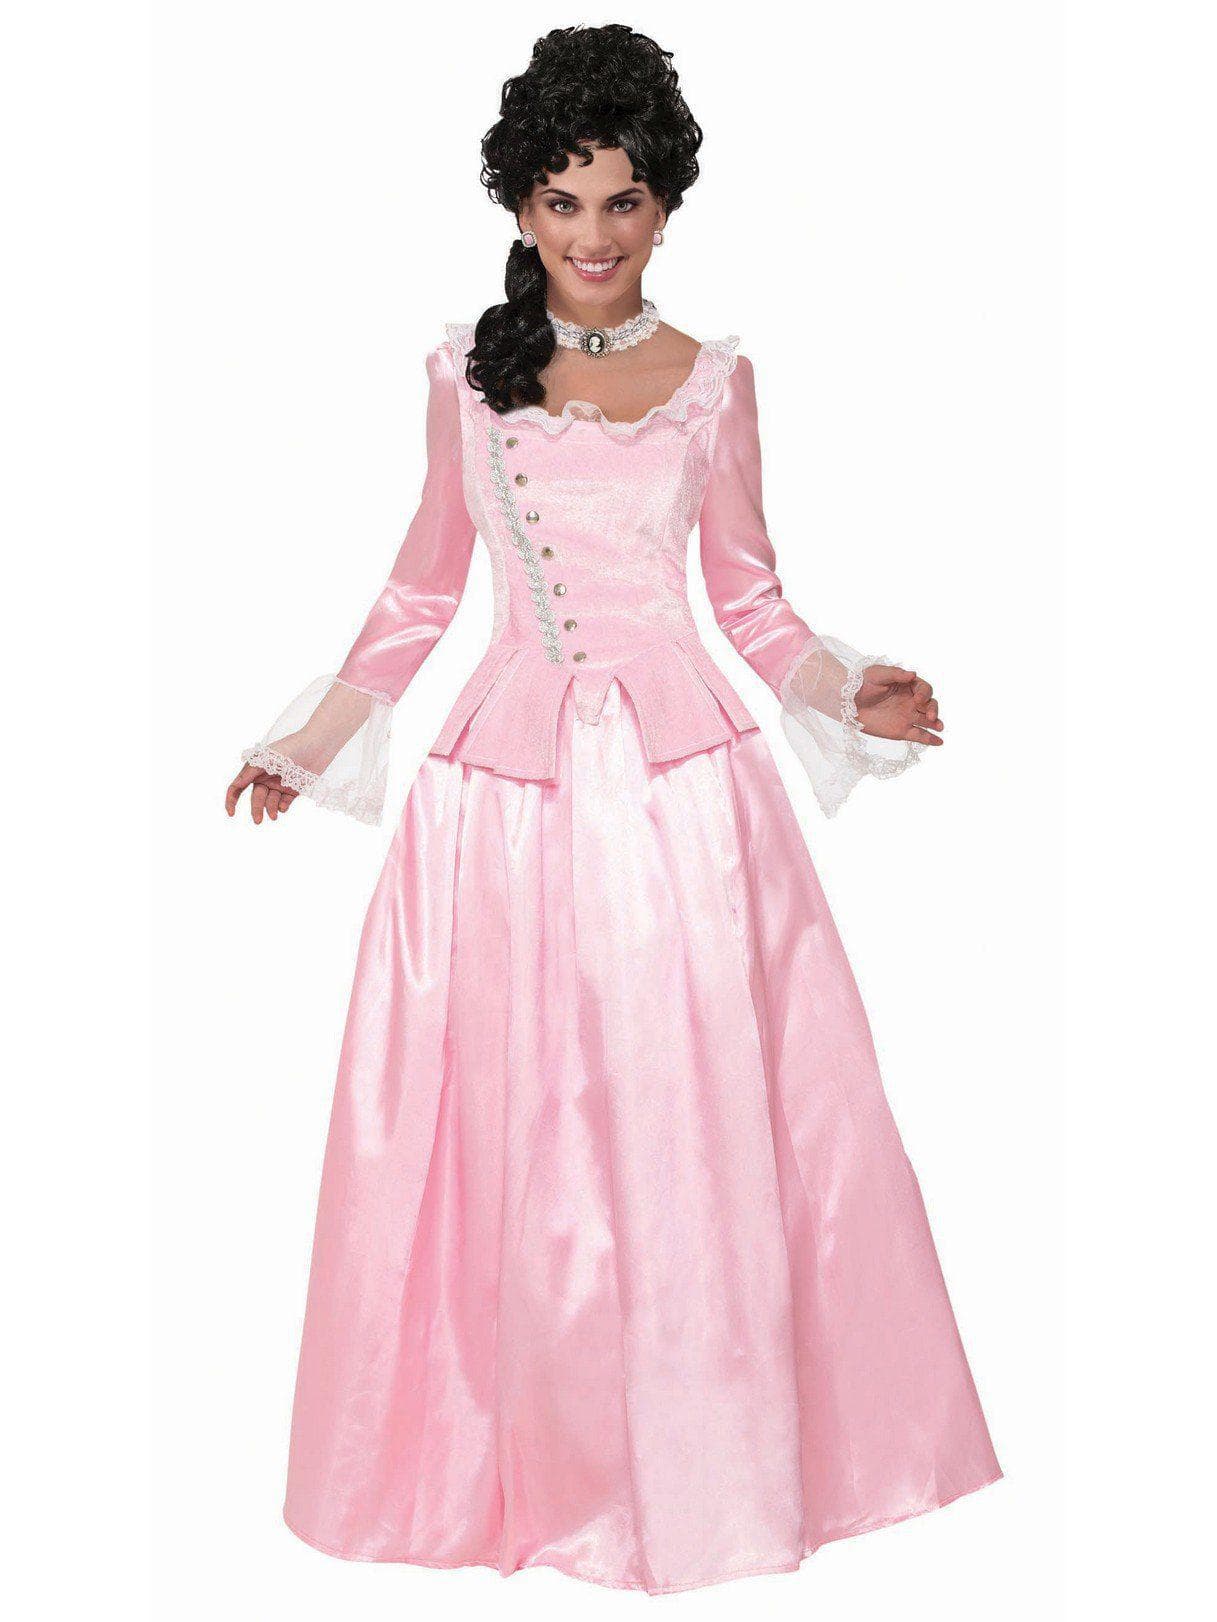 Adult Colonial Maiden Pink Costume - costumes.com